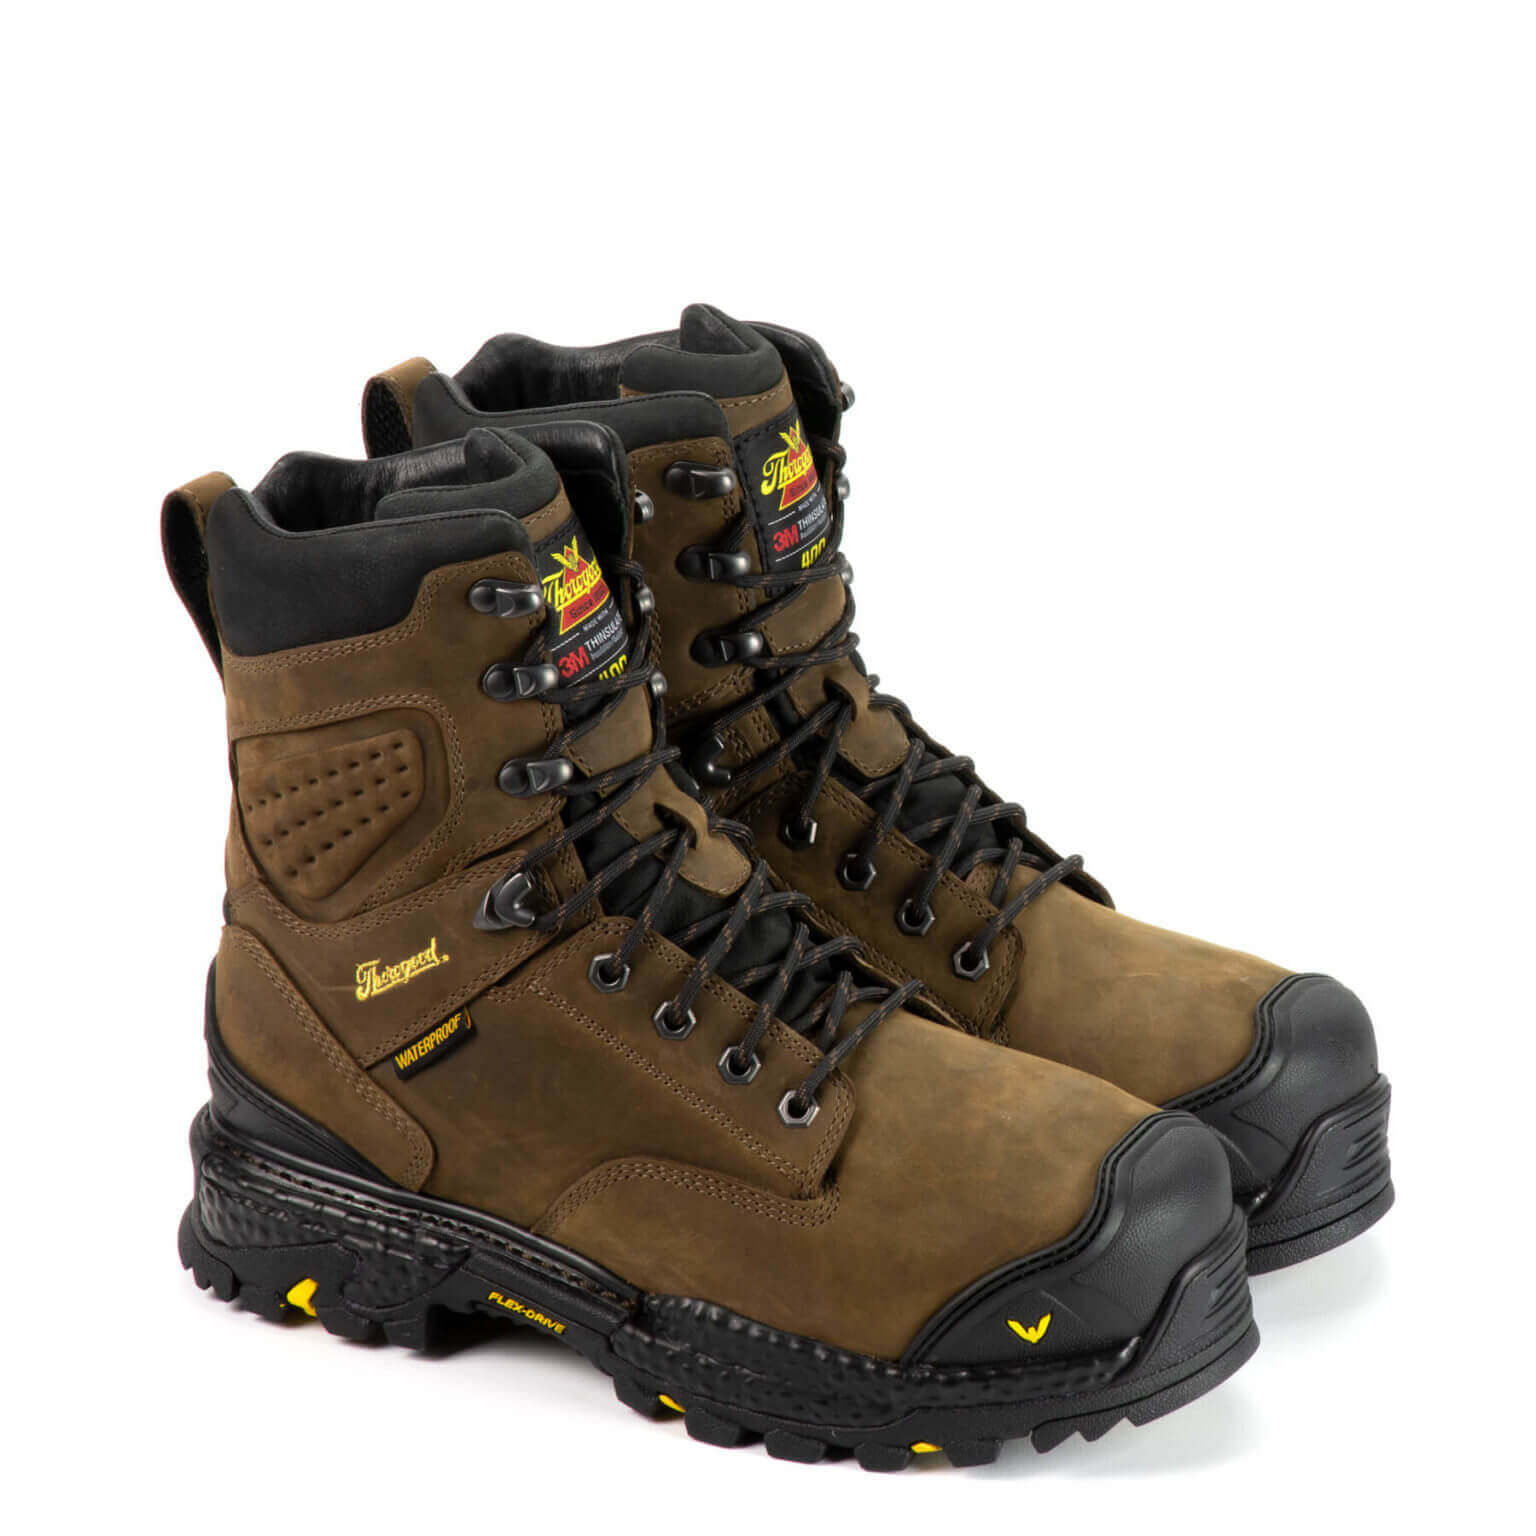 Pair shot of infinity FD series 8" studhorse insulated waterproof safety toe boot